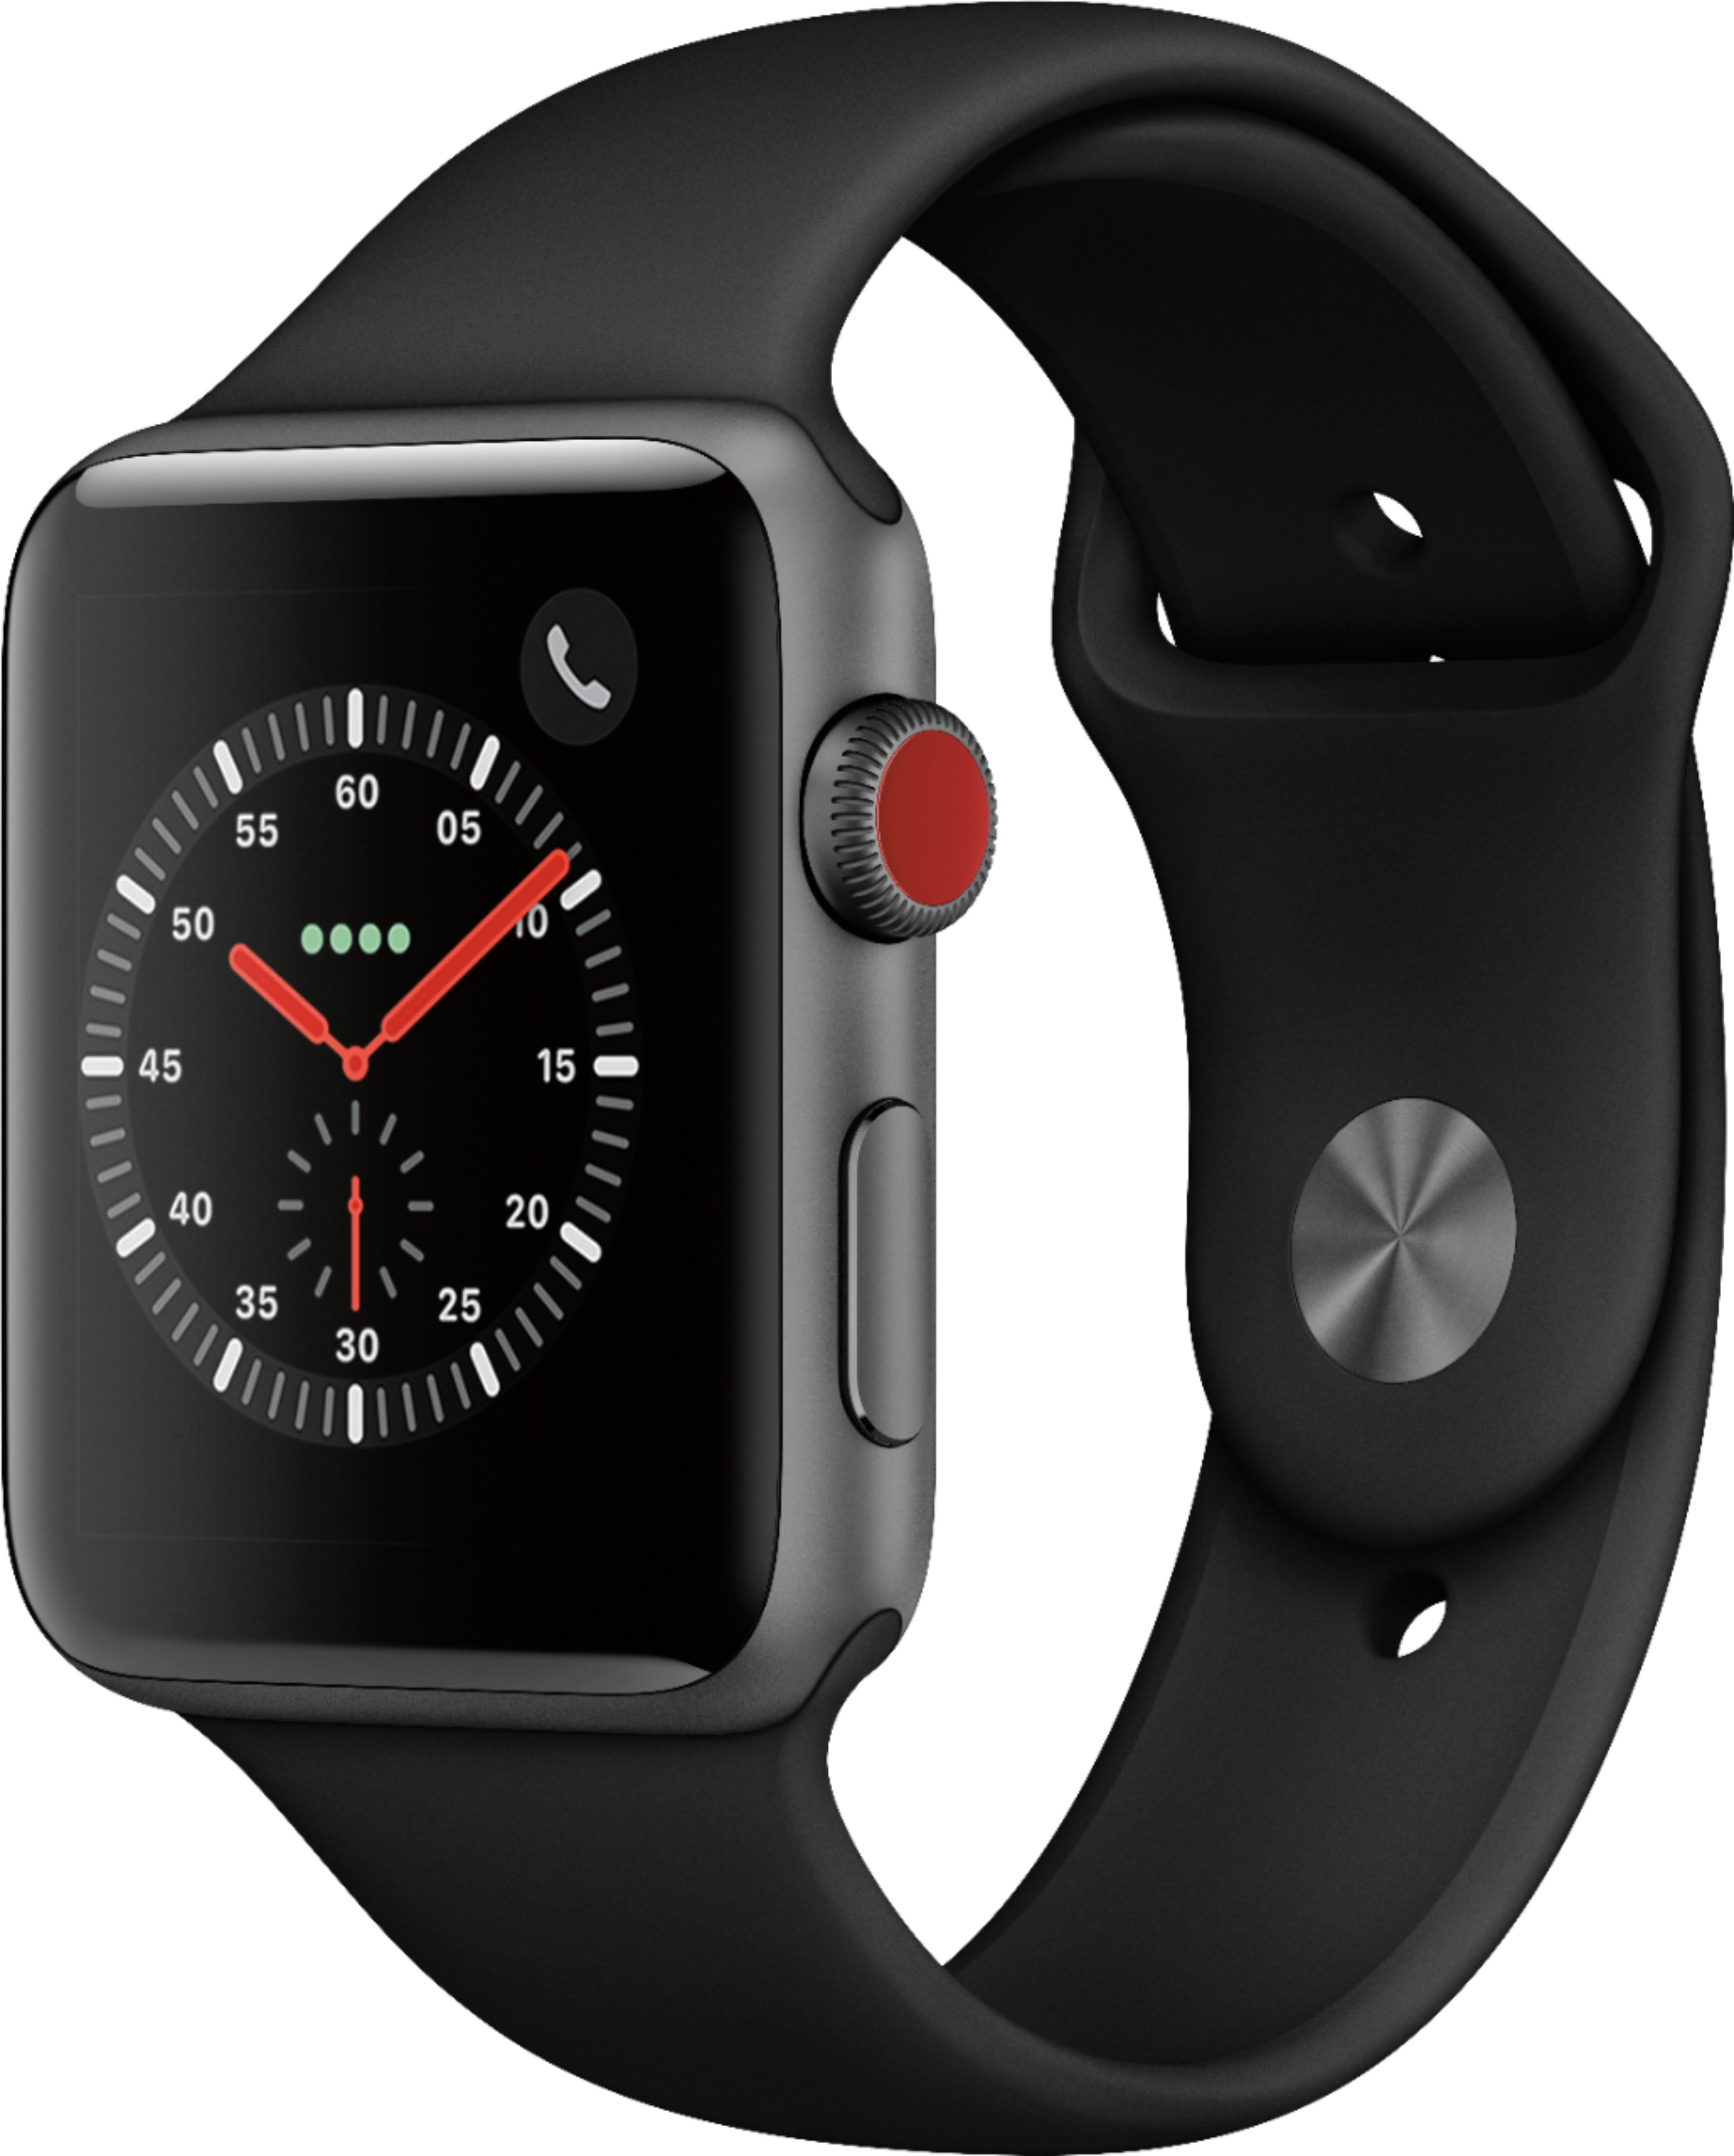 Apple Watch Series 3 (GPS + Cellular) 42mm Space Gray Aluminum Case with Black Sport Band - Space Gray Aluminum